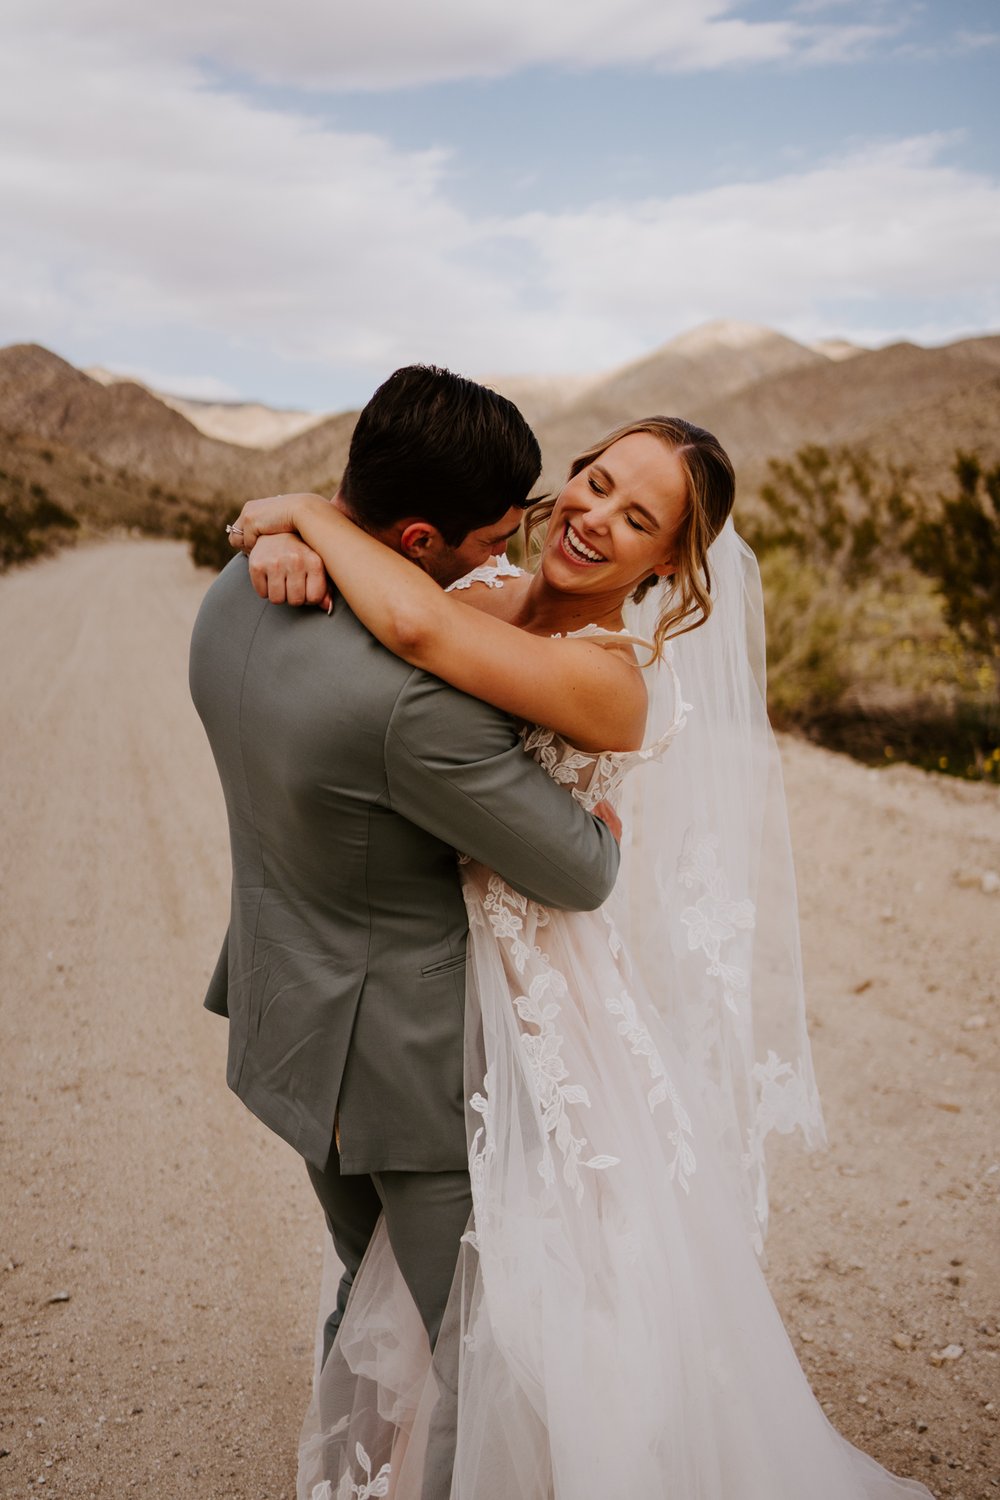 The Lautner Compound Palm Springs Wedding | Tida Svy Photography | www.tidasvy.com